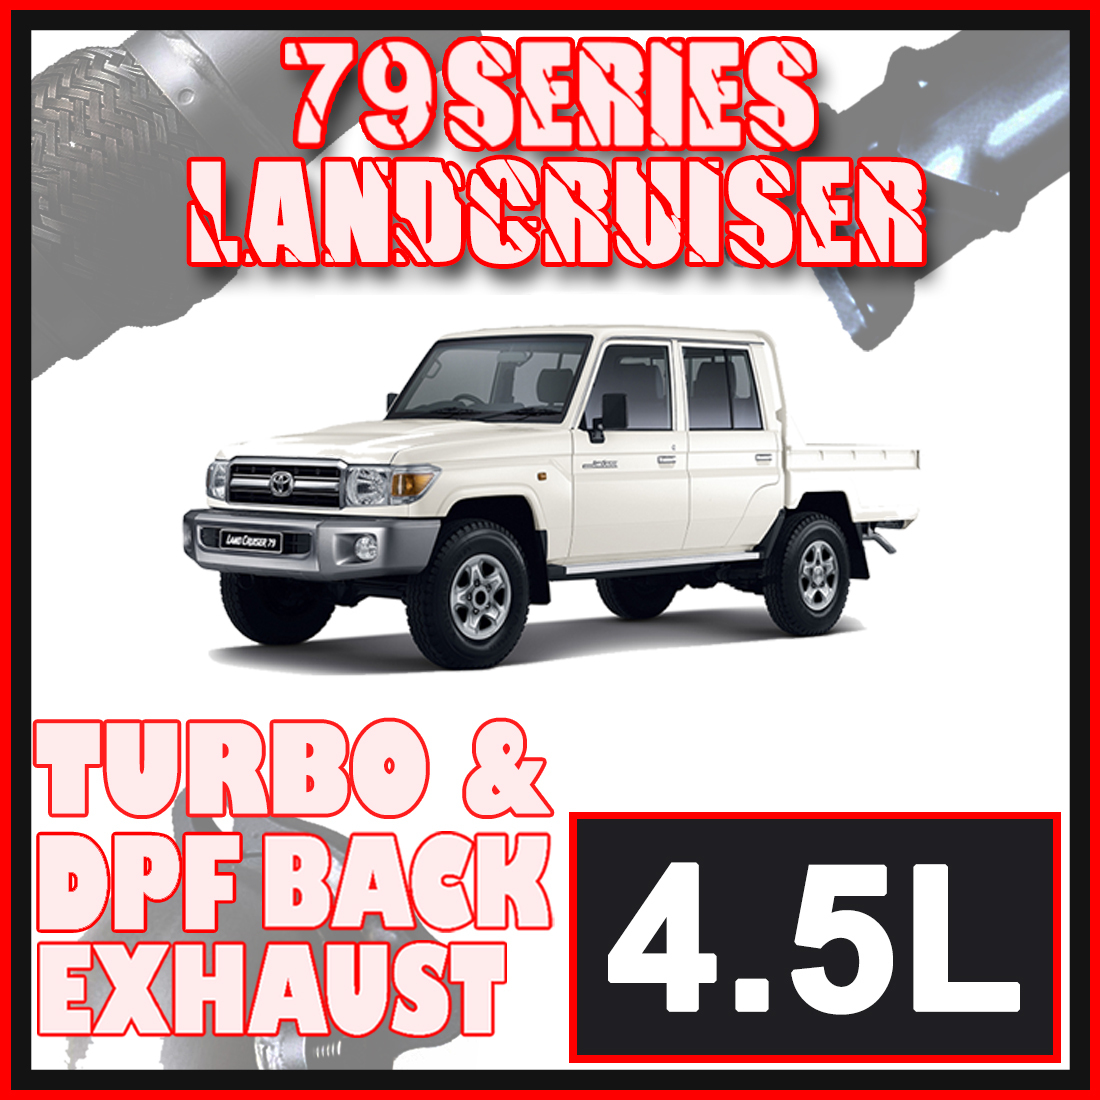 Toyota Landcruiser Exhaust 79 Series Dual Cab 3" & 3.5" DPF & Turbo Back Systems image